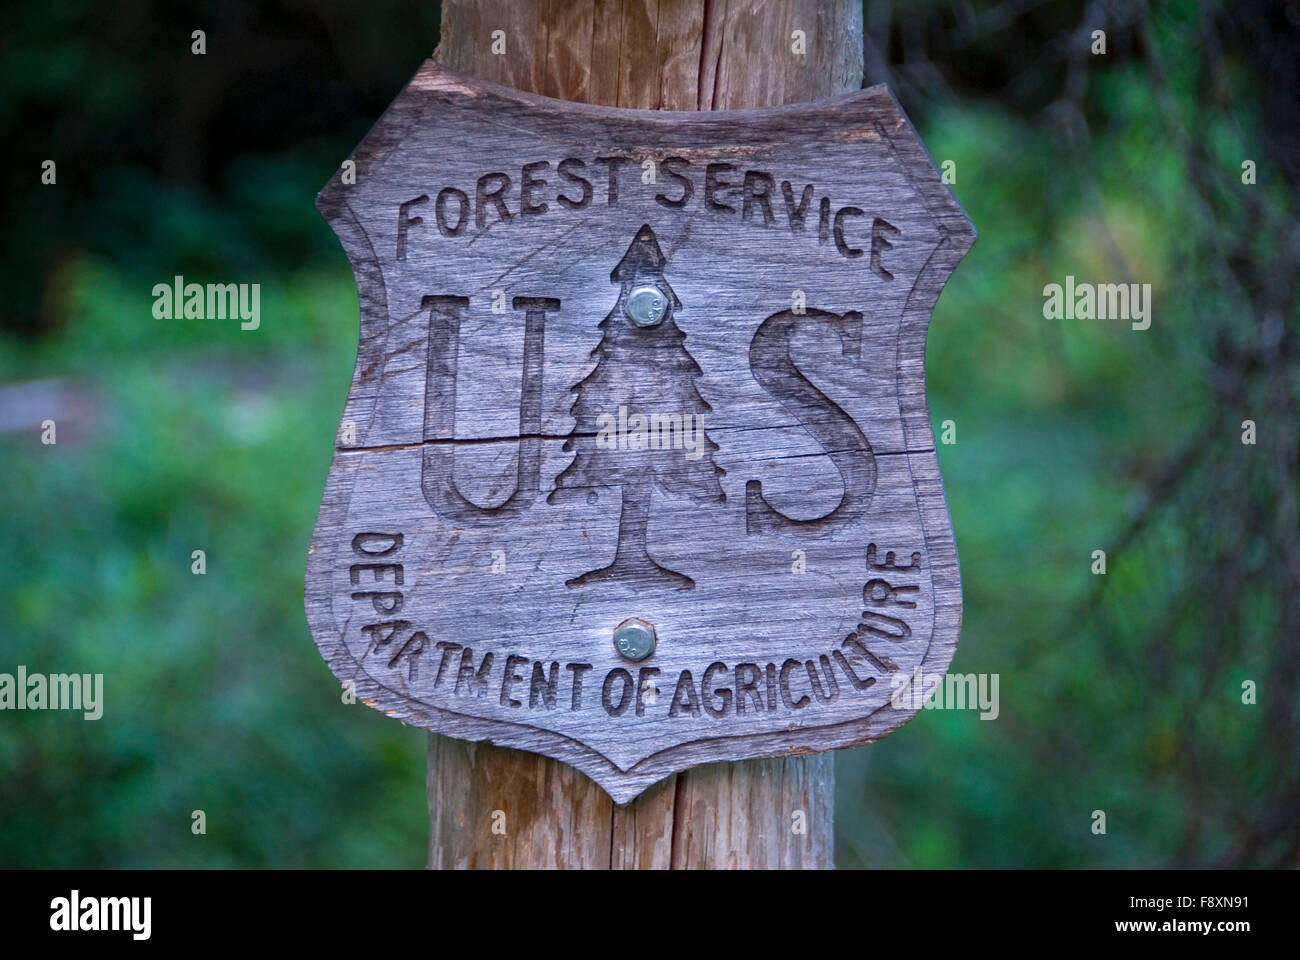 Forest Service emblem, Mission Mountains Wilderness, Flathead National Forest, Montana Stock Photo